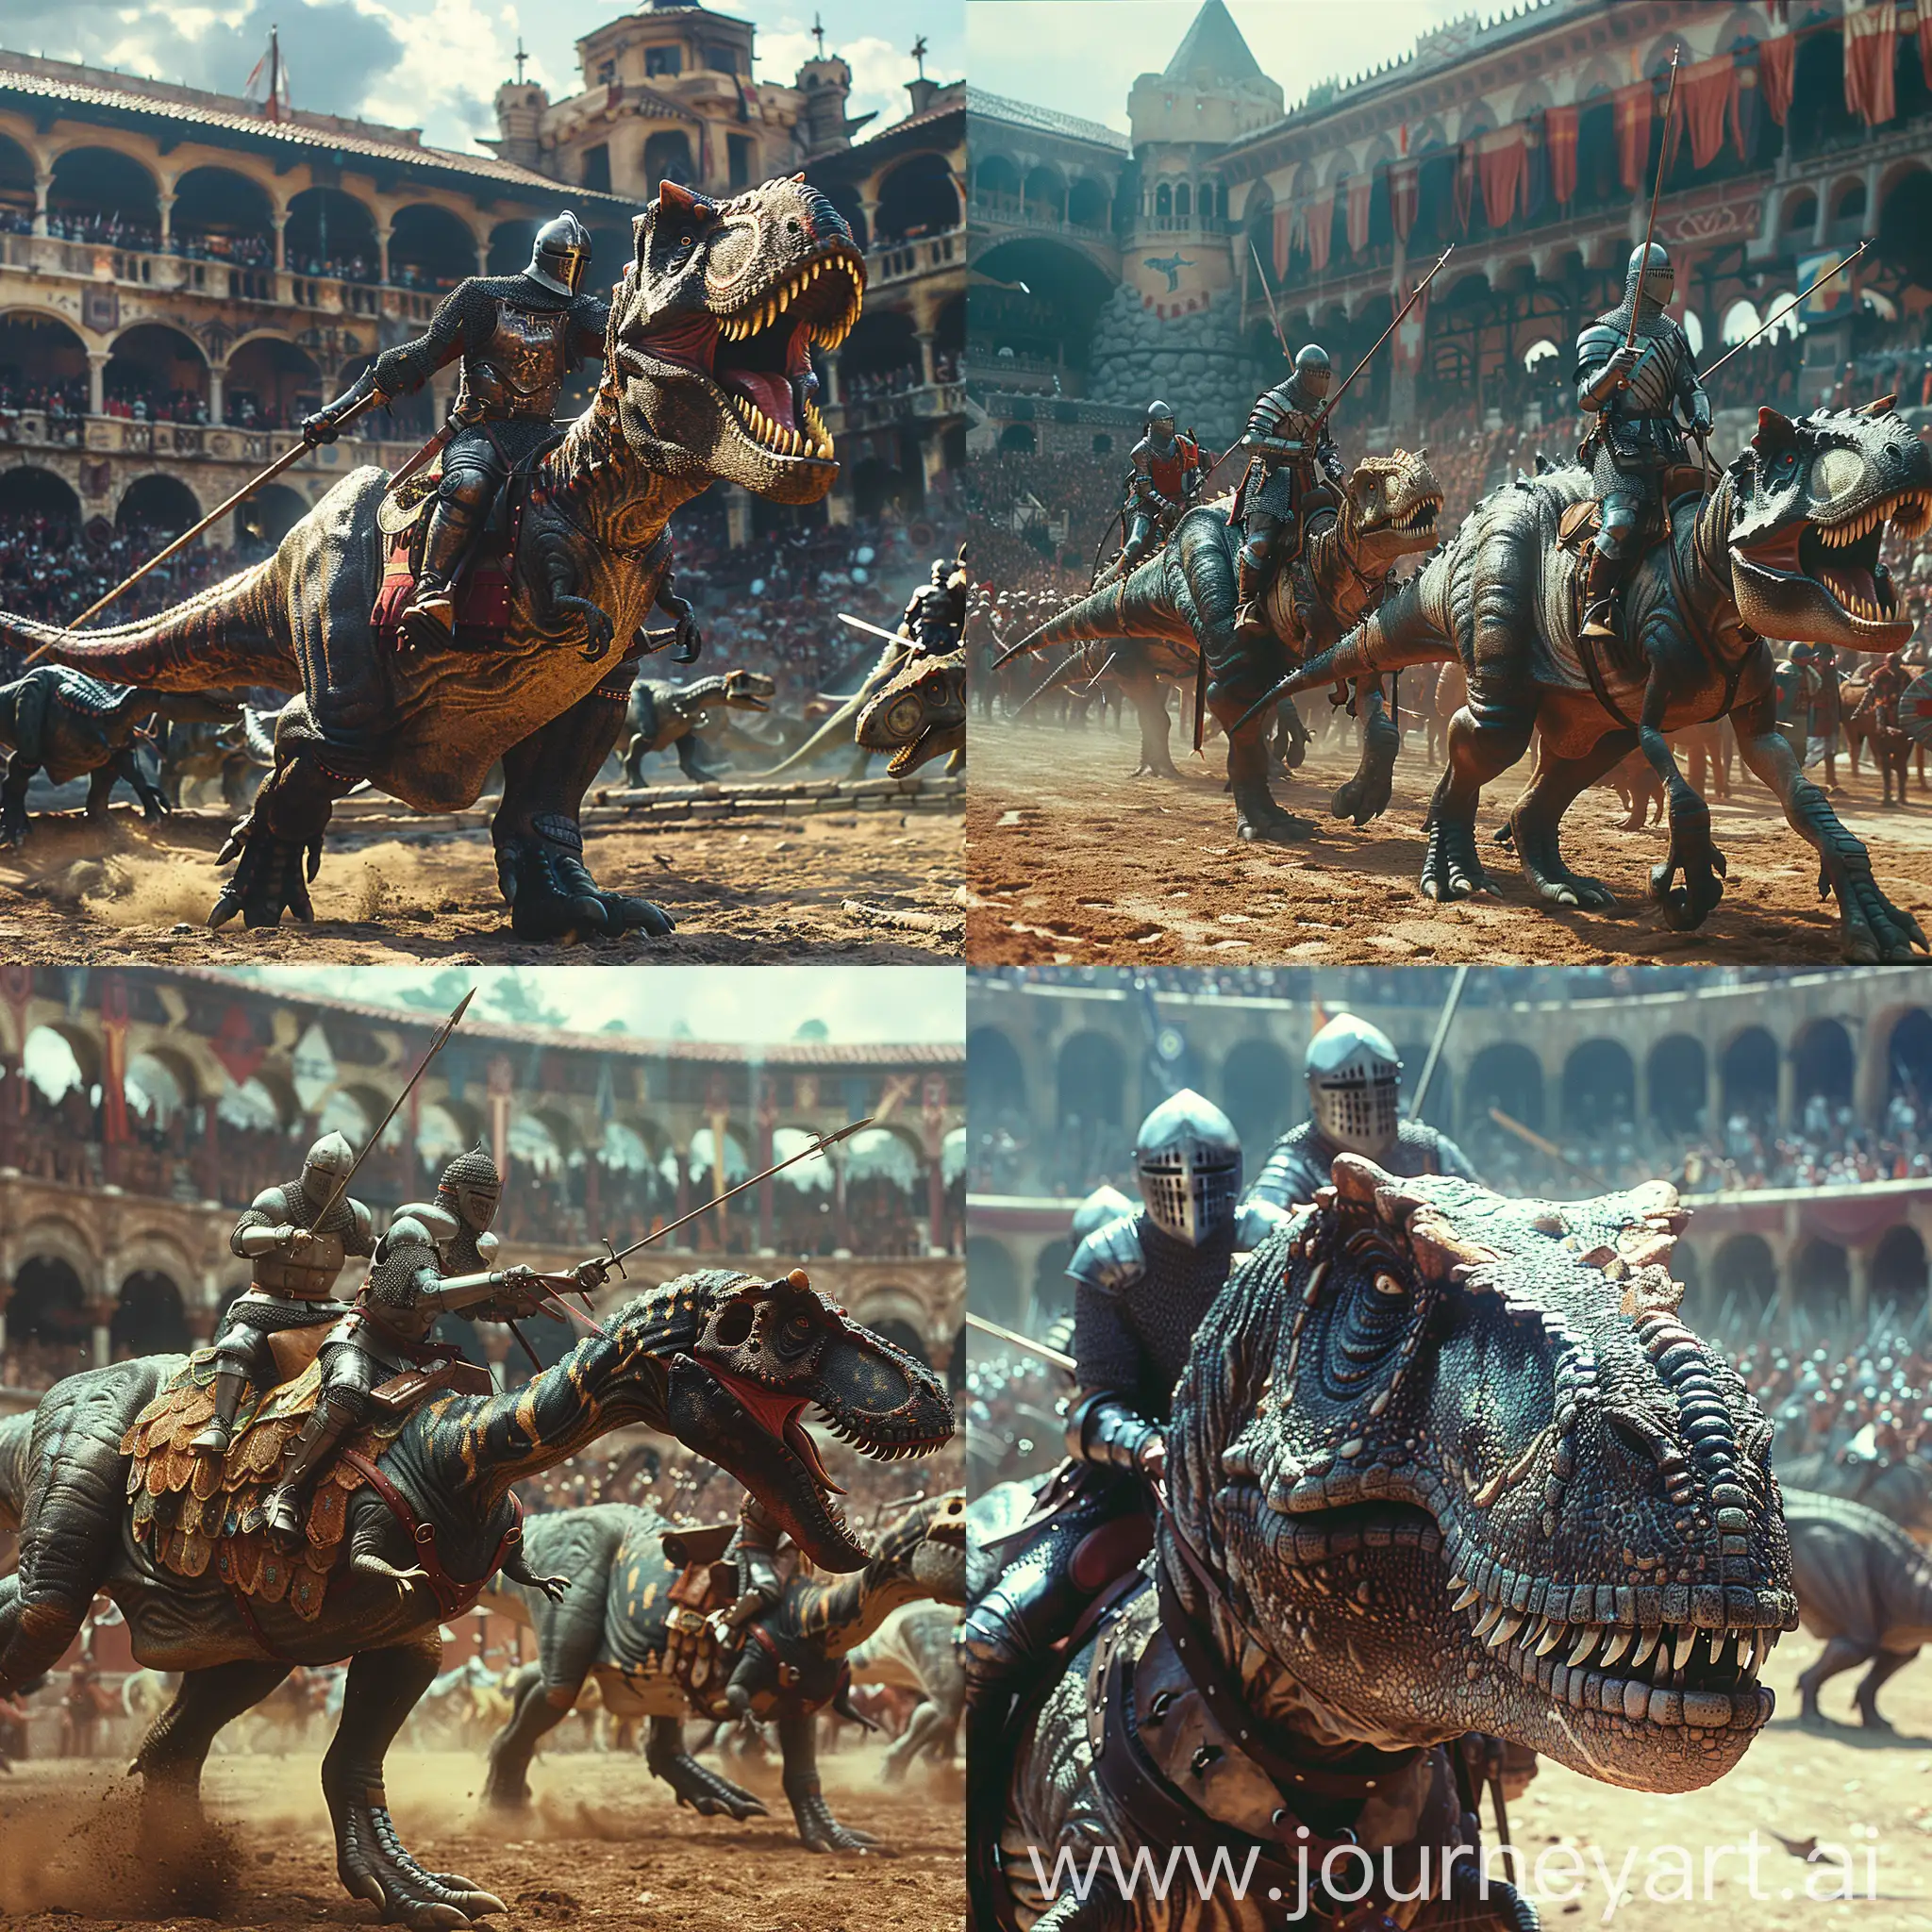 Knights-Jousting-with-Dinosaurs-in-a-Medieval-Arena